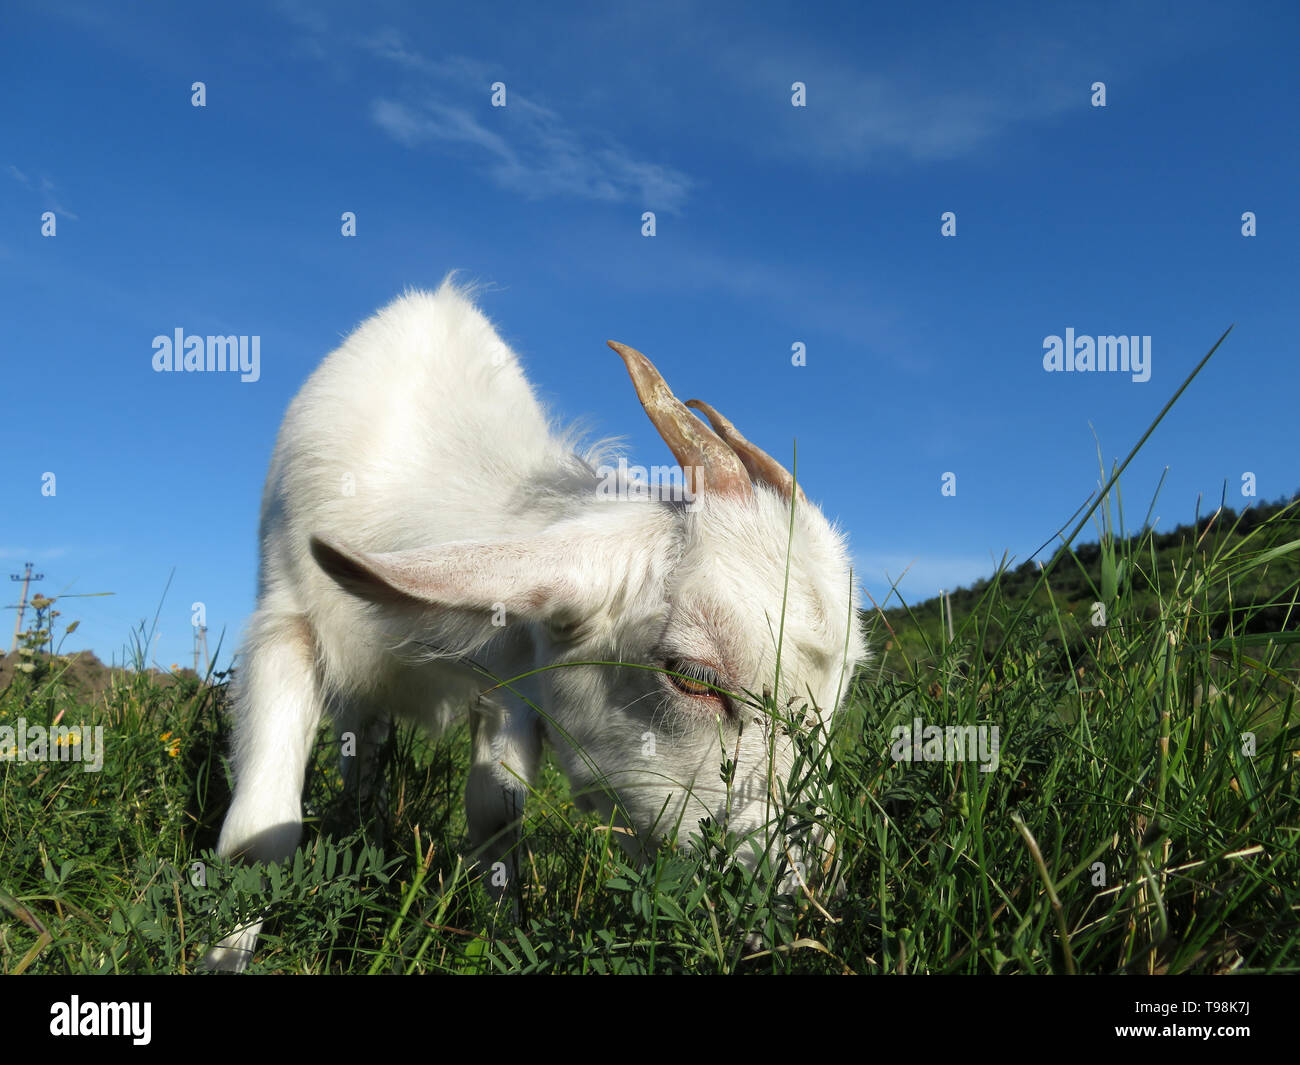 White goat grazing on a summer mountain meadow. Kid goat on a pasture with green grass, picturesque rural landscape with wildflowers and blue sky Stock Photo